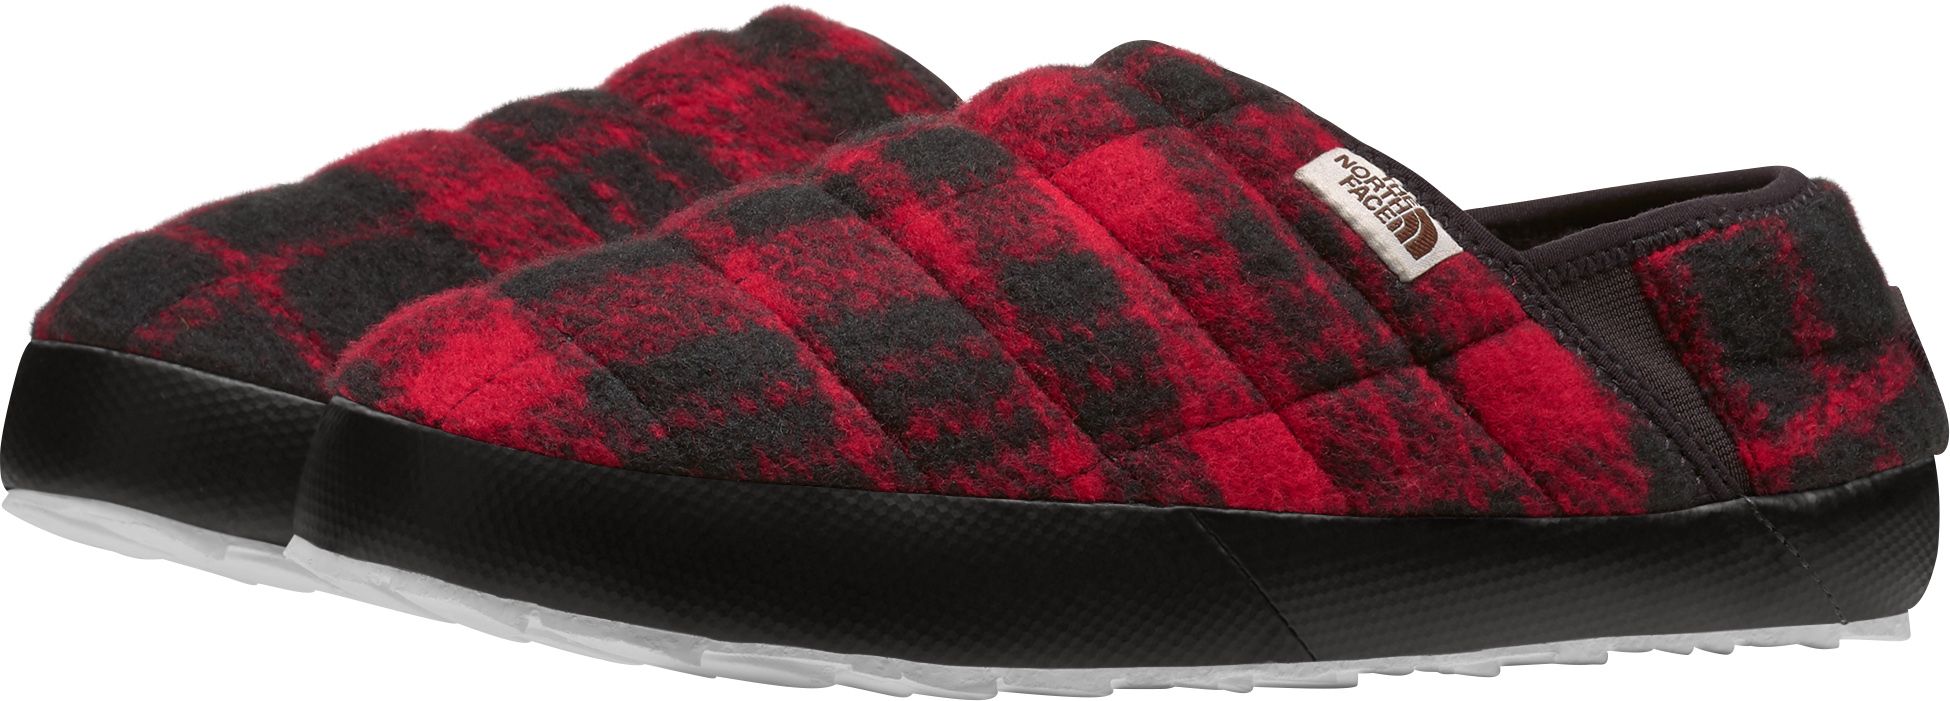 north face ladies slippers